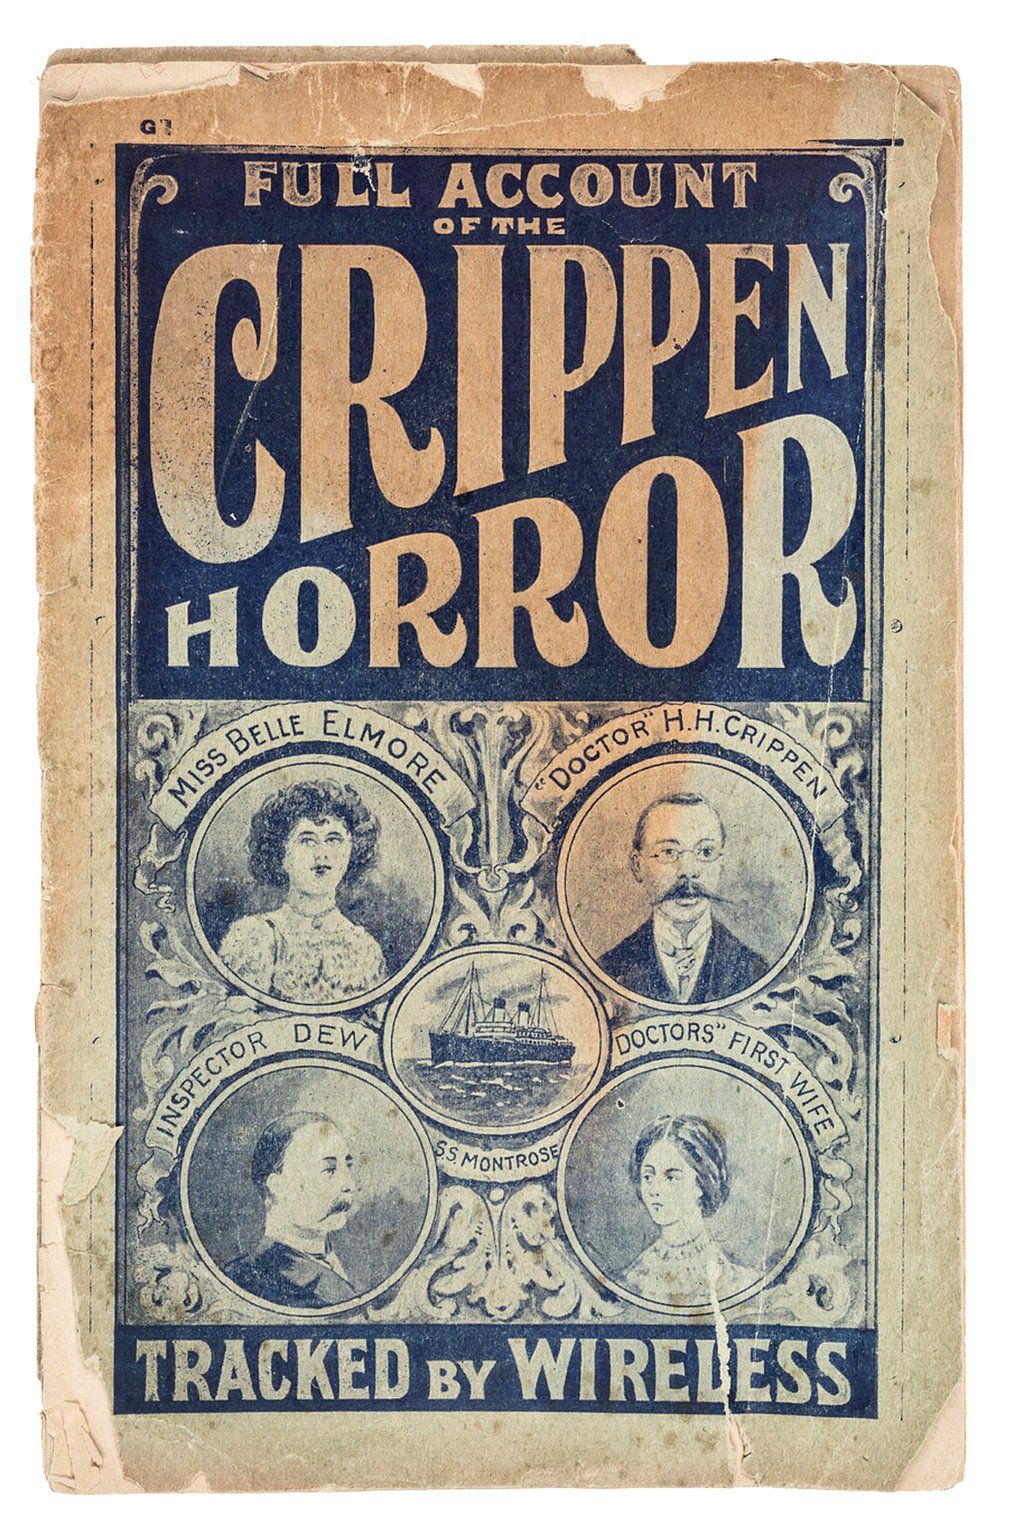 Booklet on the Dr Crippen case which fascinated the public, circa 1910